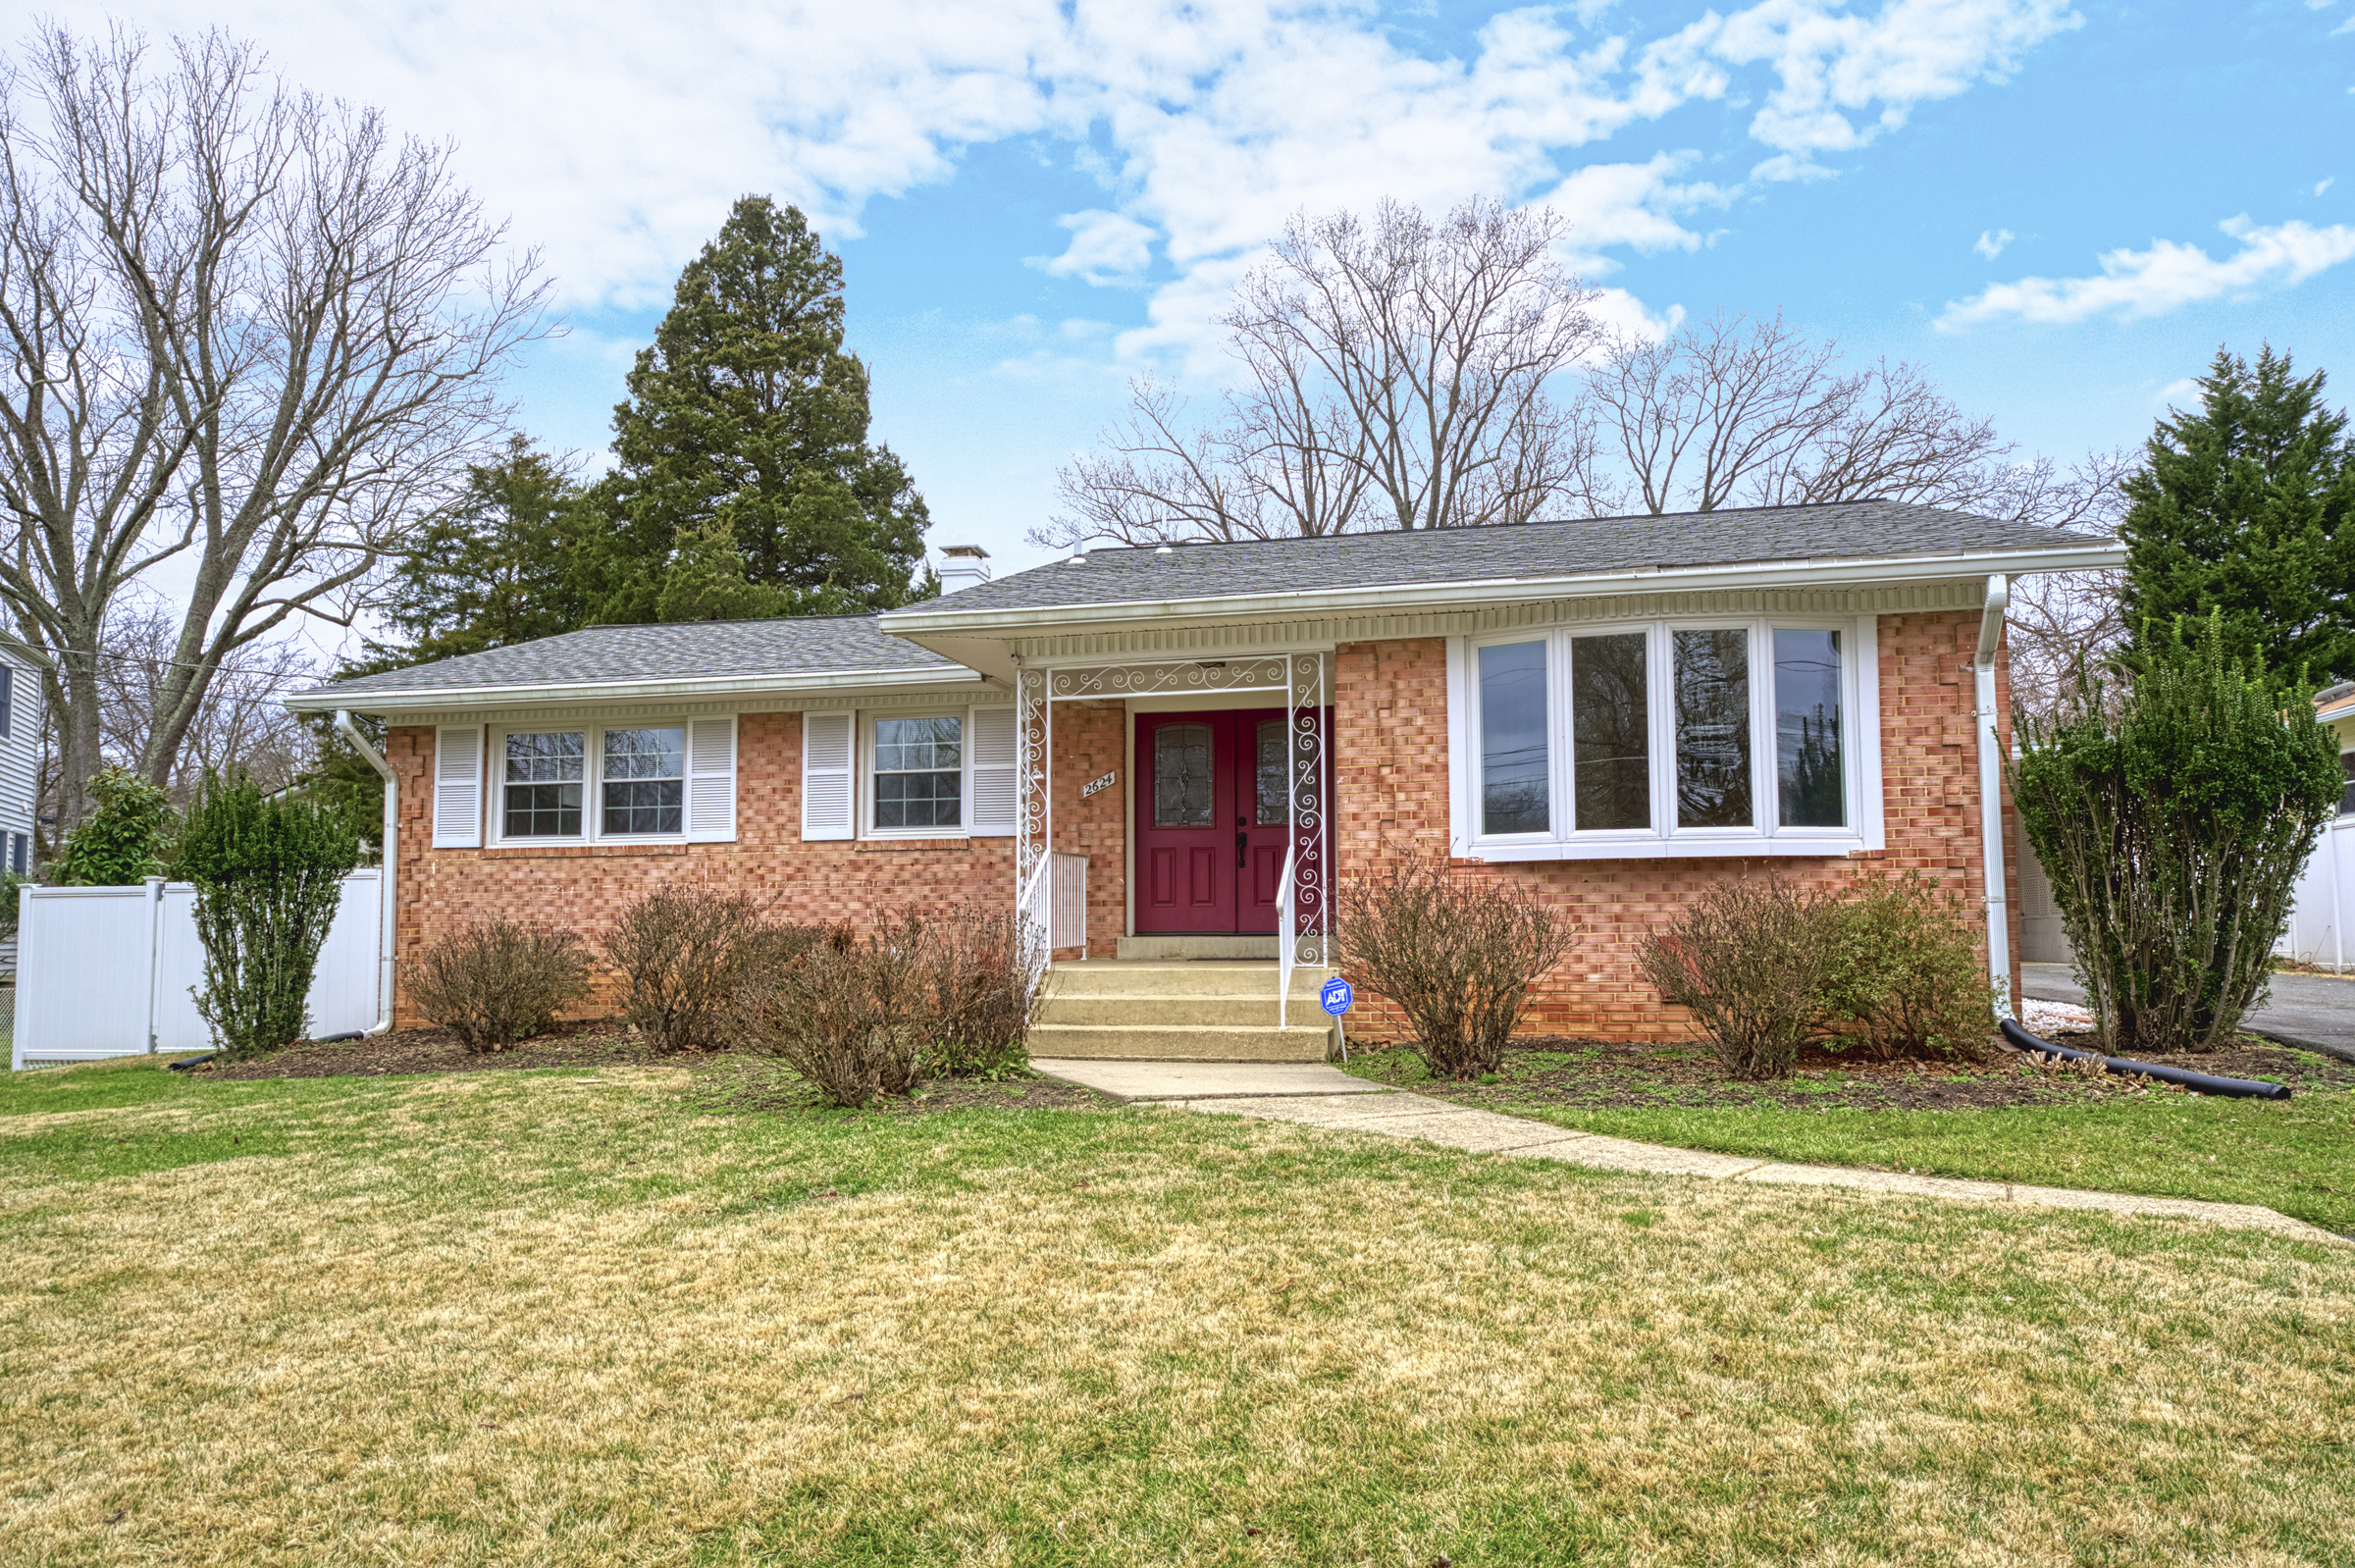 Professional exterior photo of 2624 Depaul Dr in Vienna, VA - showing the front of a brick ranch home with covered front porch and white shutters and window framing